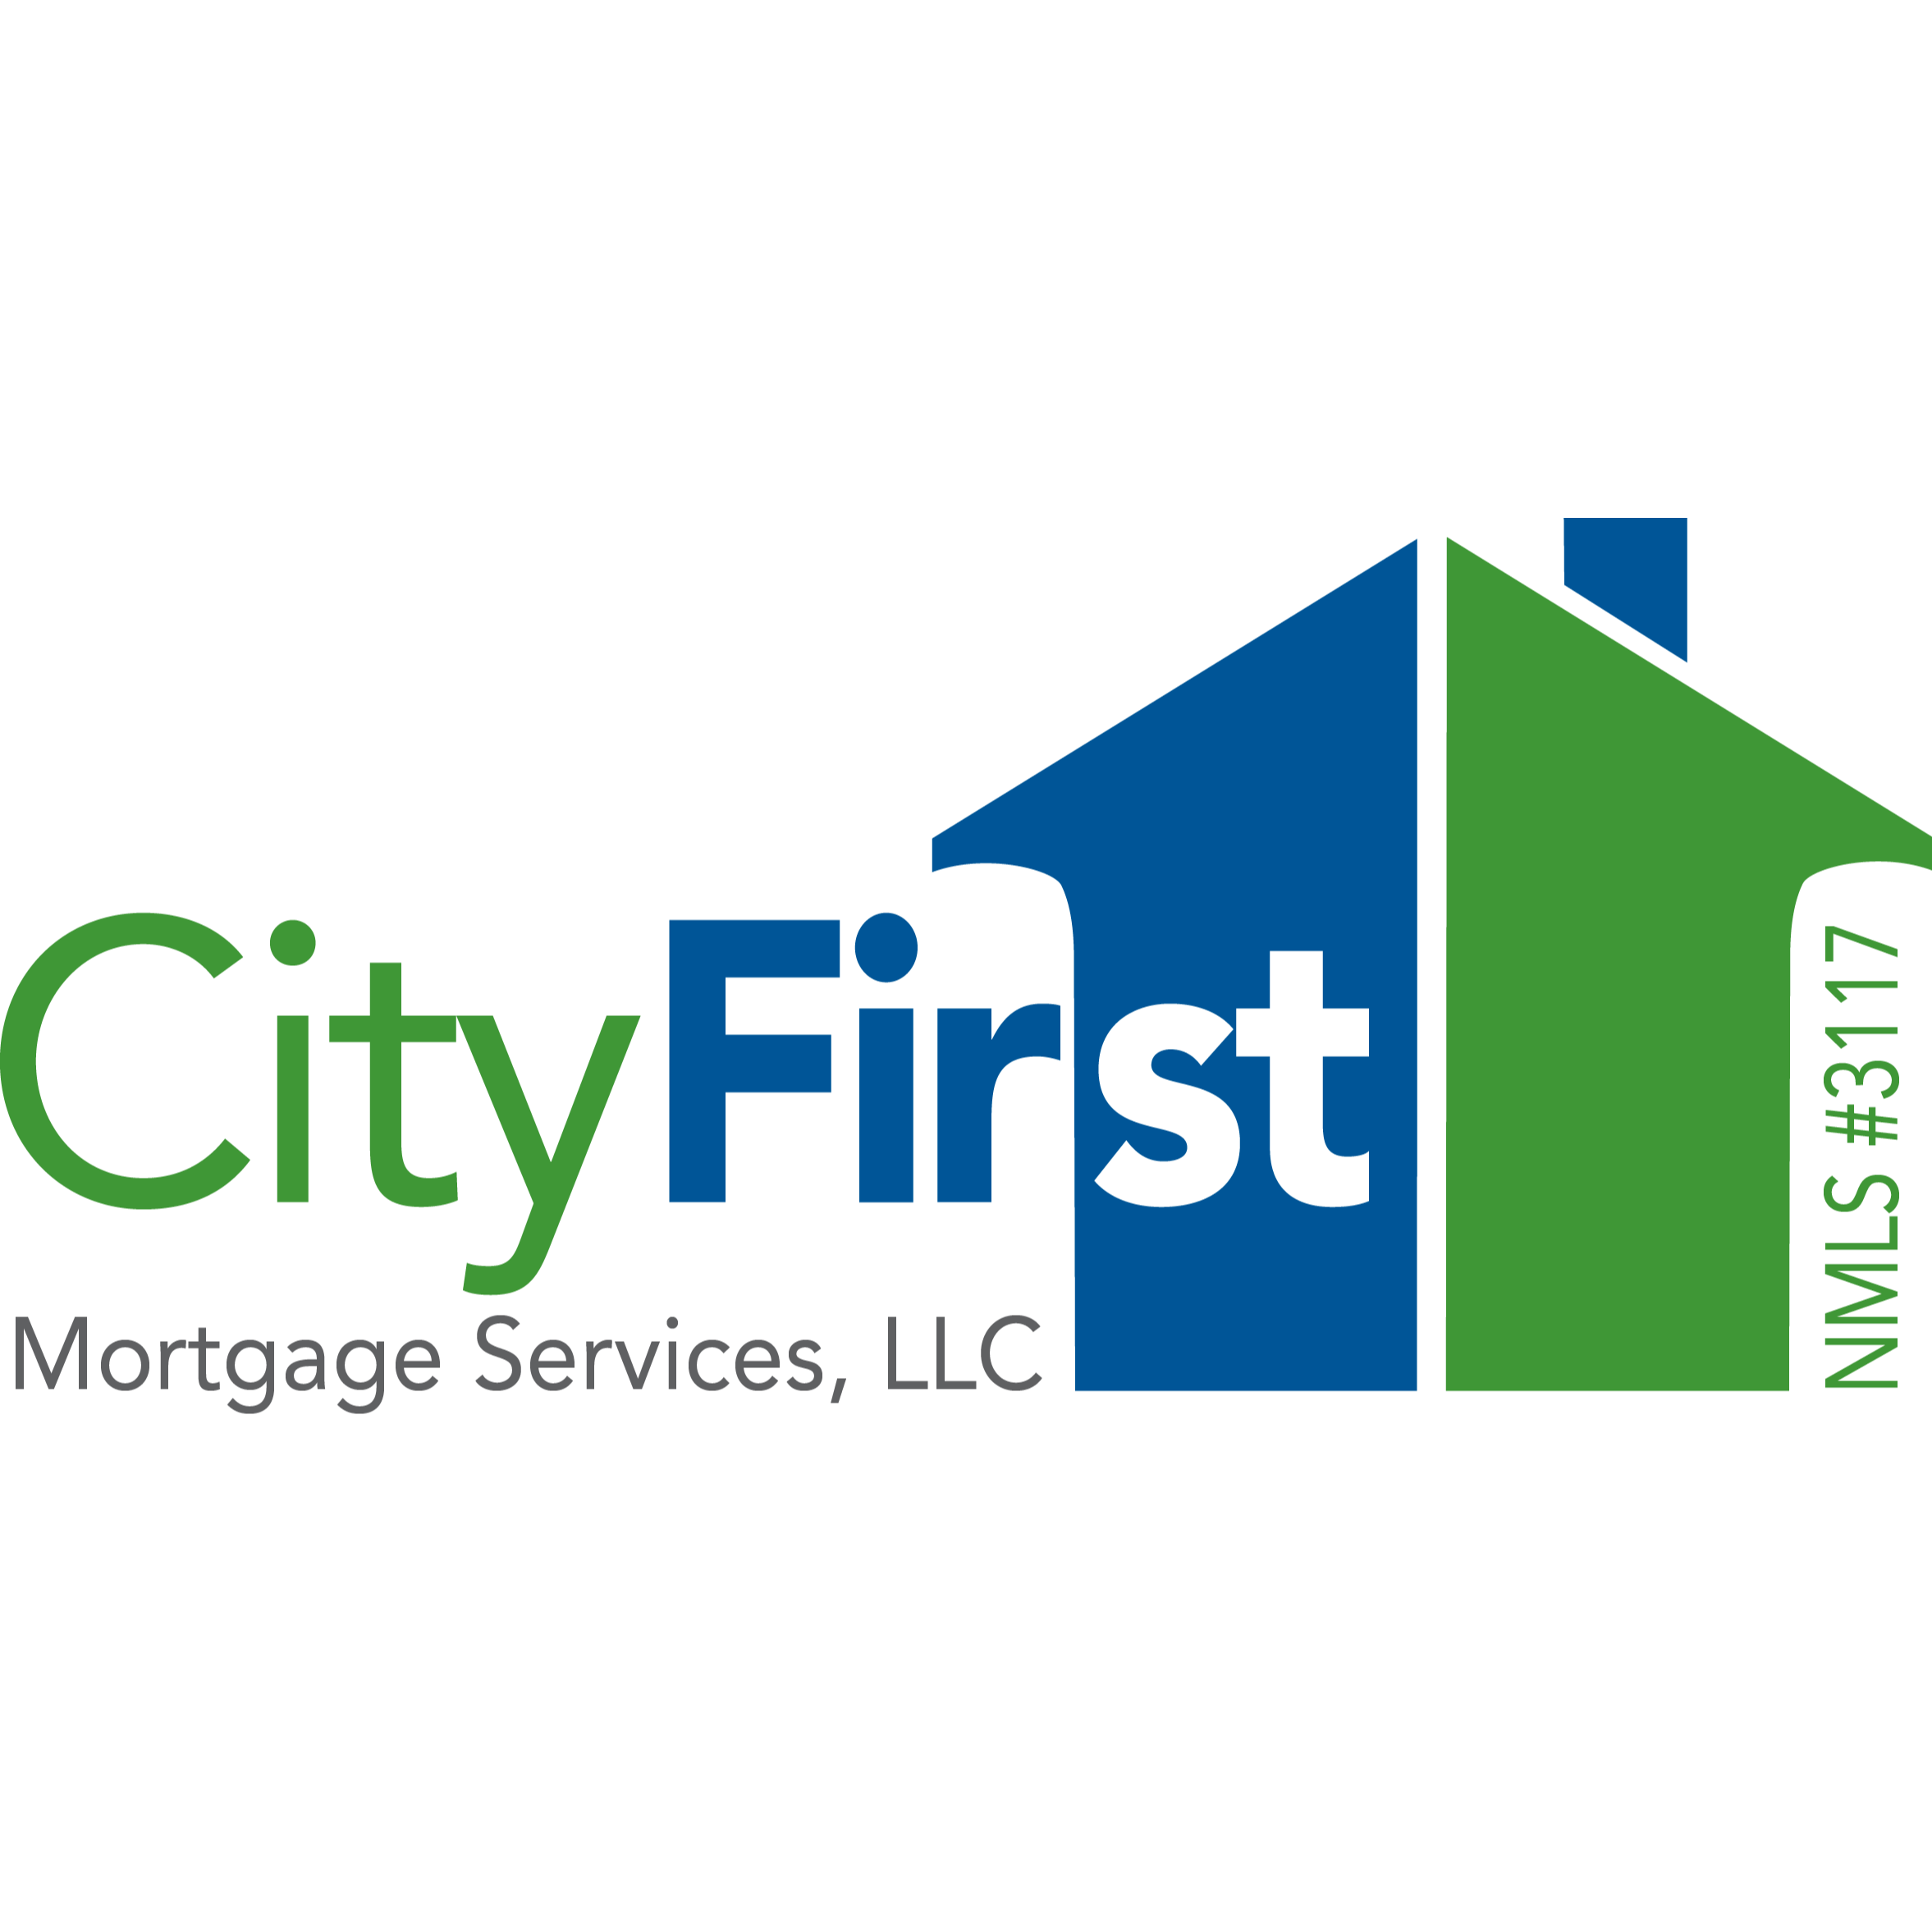 City First Mortgage Services, LLC Logo